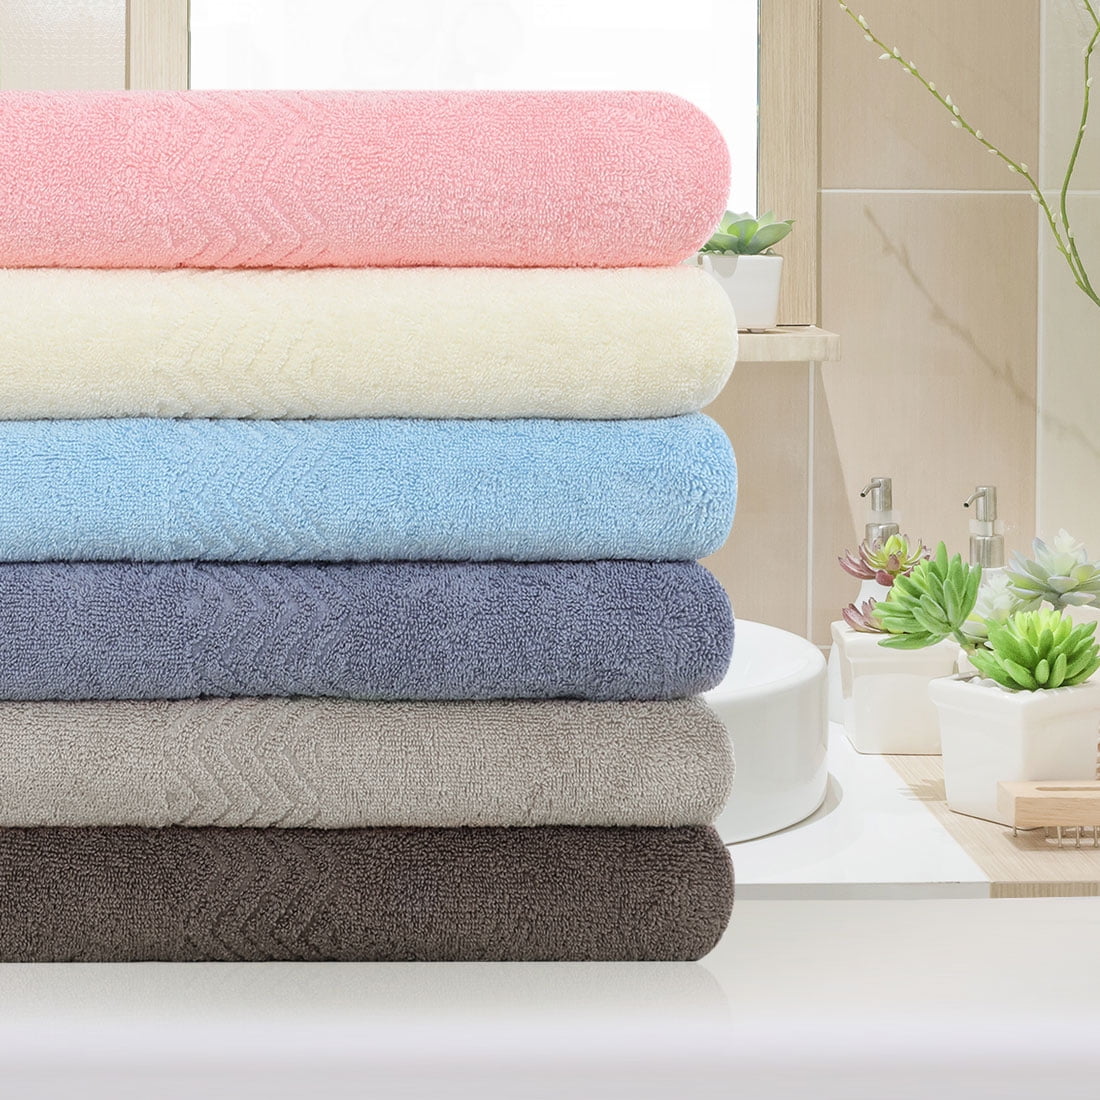 These “Super Soft” Bath Towels Are Just $4 Apiece at  Today